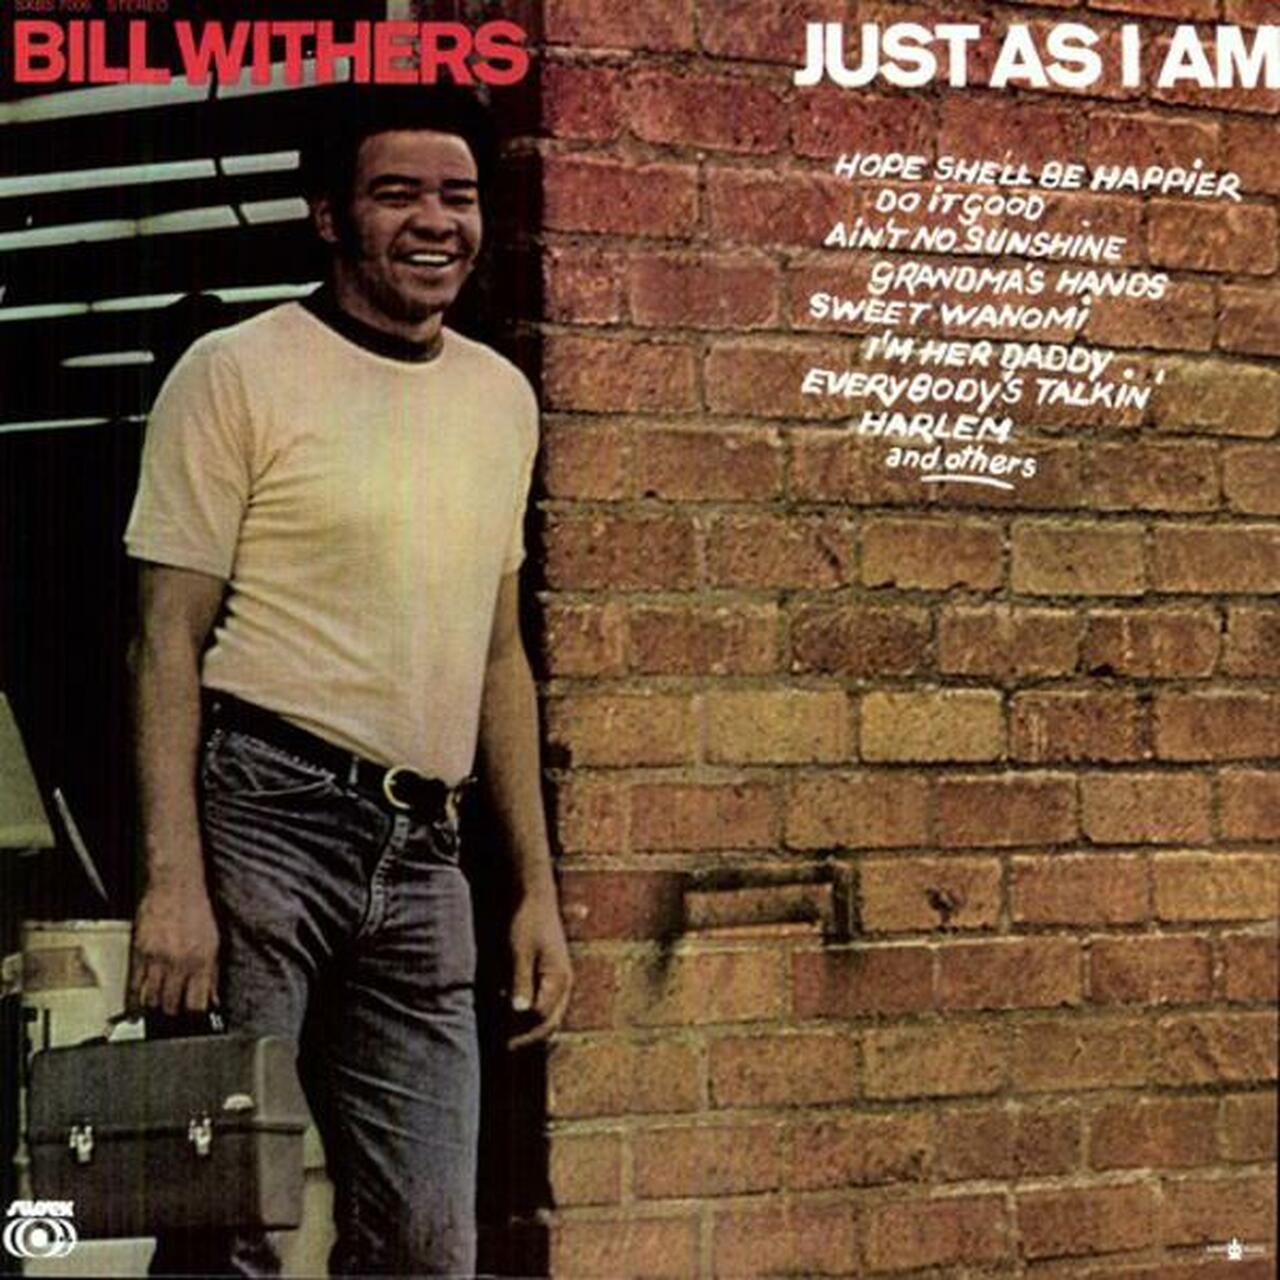 BILL WITHERS - JUST AS I AM - VINYL LP - Wah Wah Records